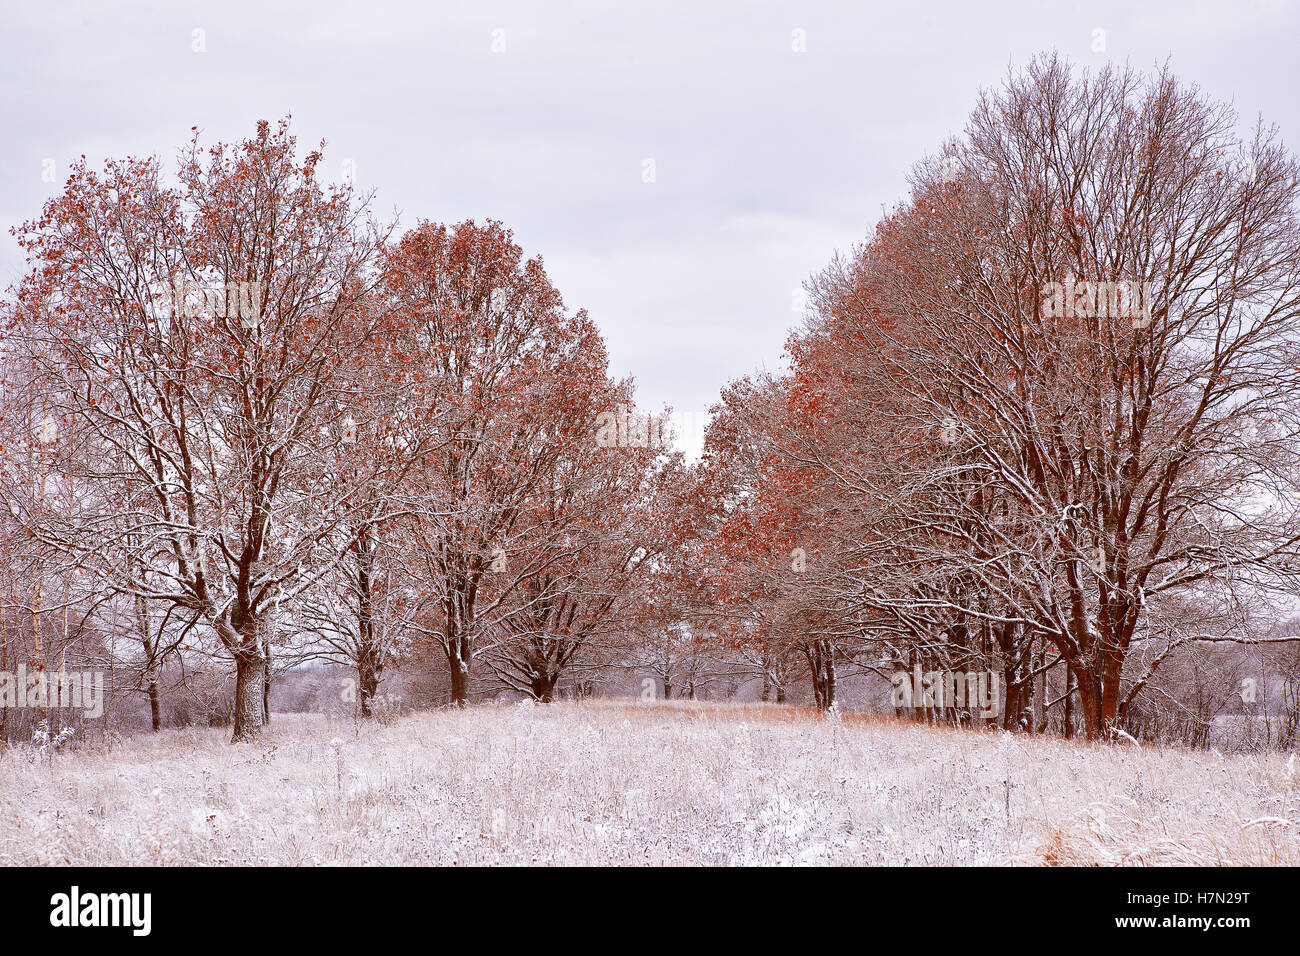 First snow in the autumn park. Fall colors on the trees. Belarus autumn Landscape Stock Photo